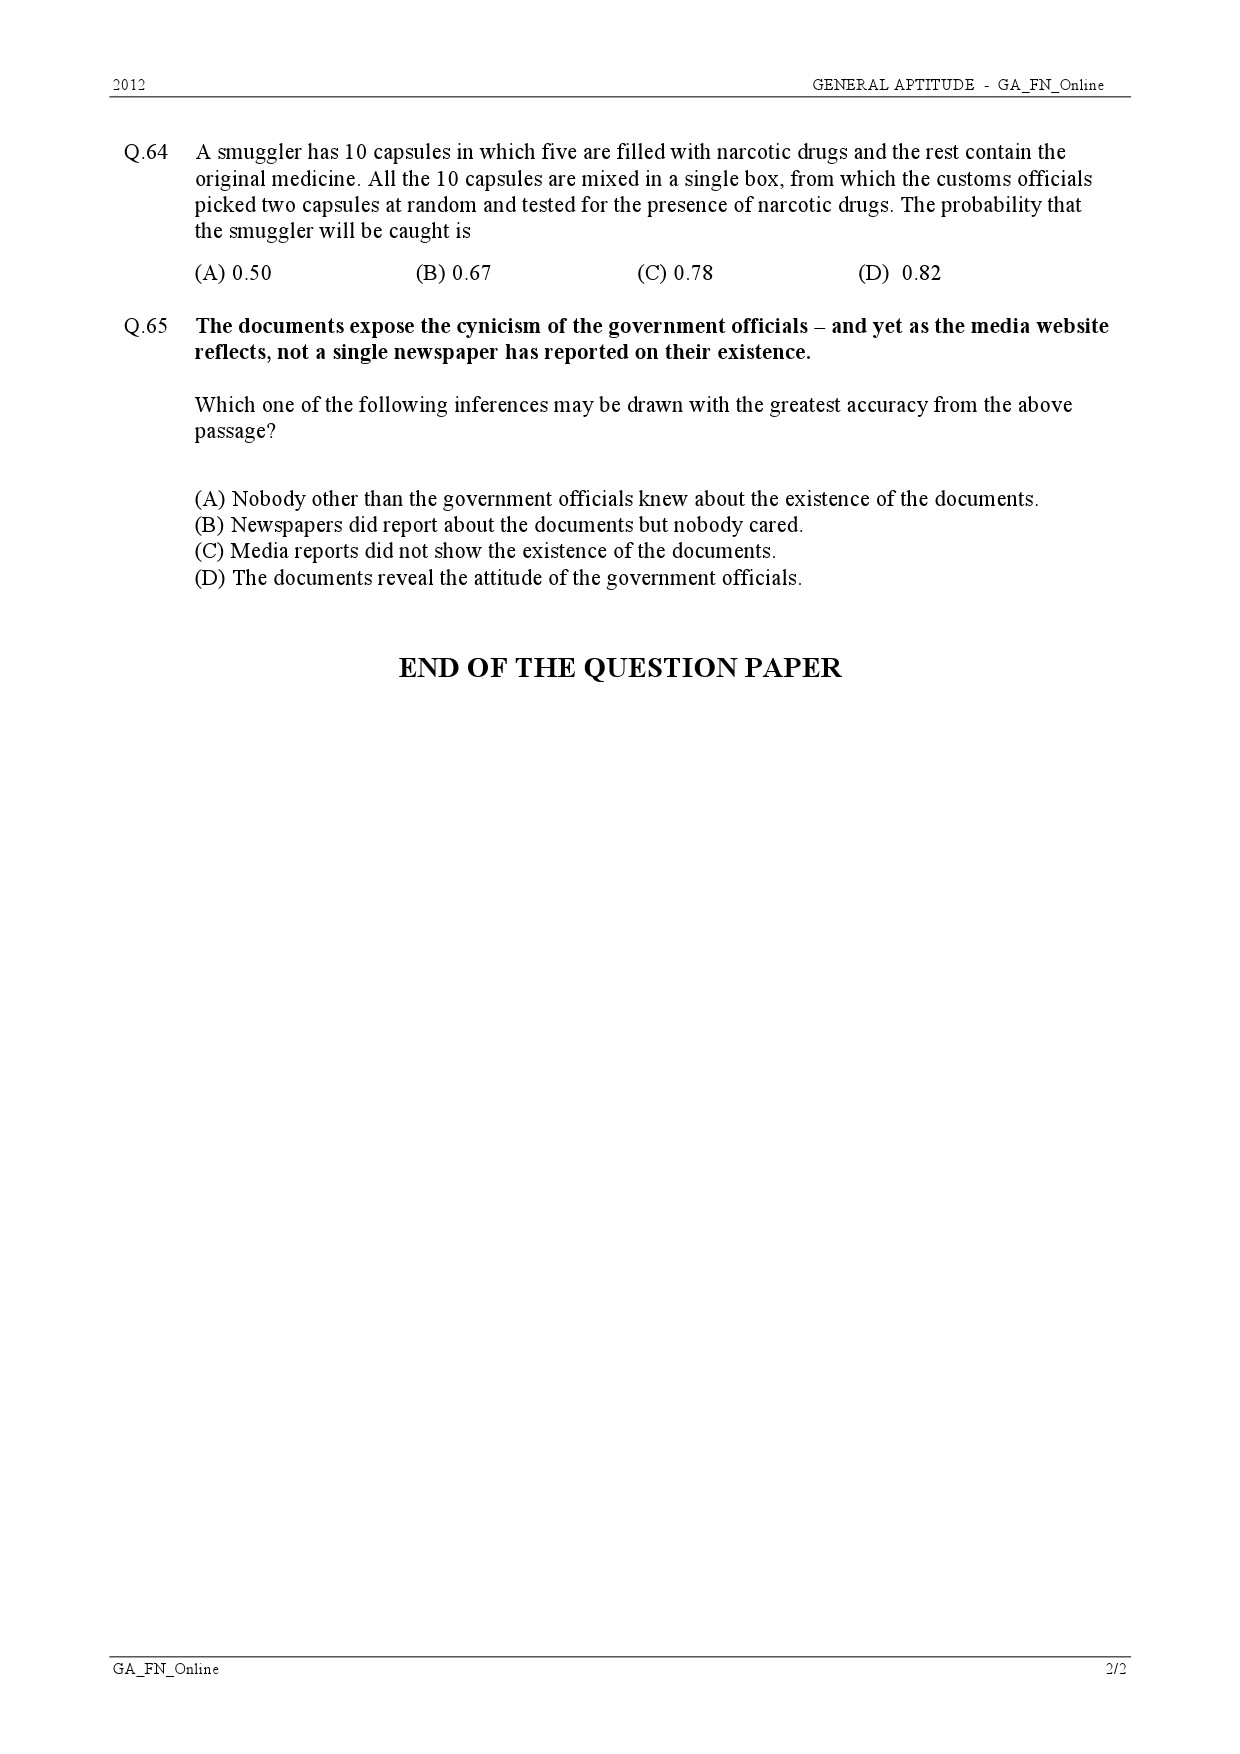 GATE Exam Question Paper 2012 Geology and Geophysics 16